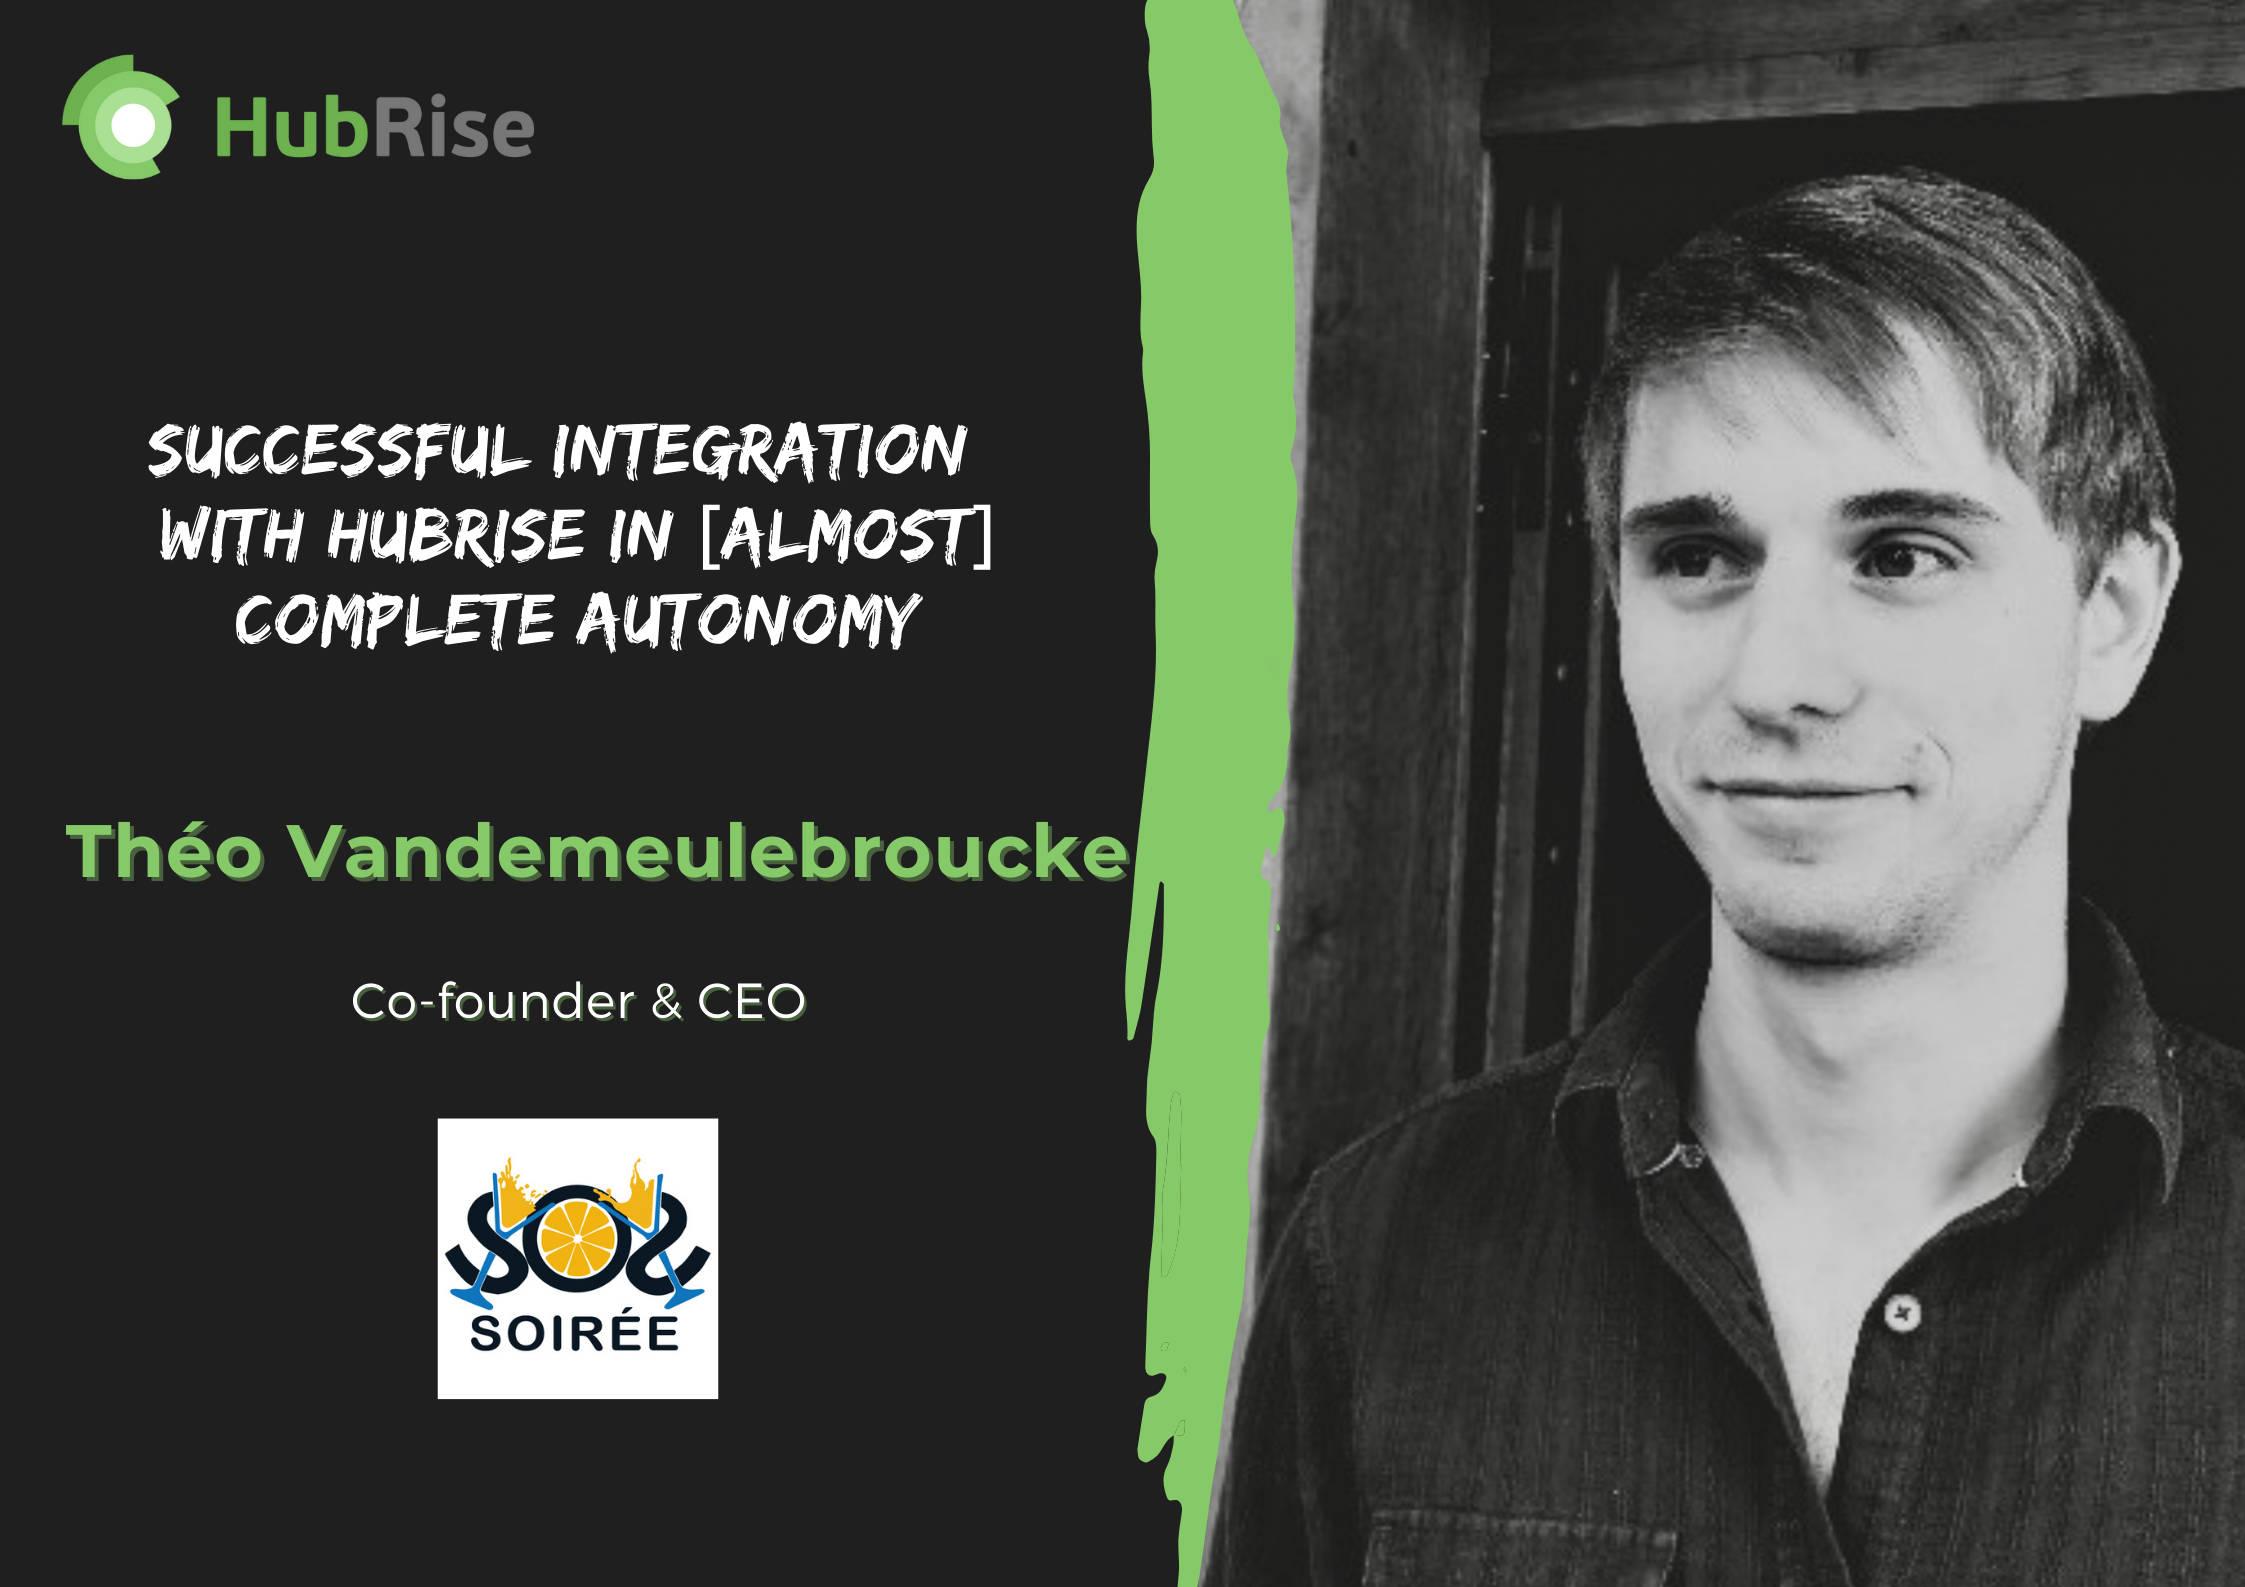 SOS Soirée: How the Independent Brand Integrated with HubRise in Complete Autonomy